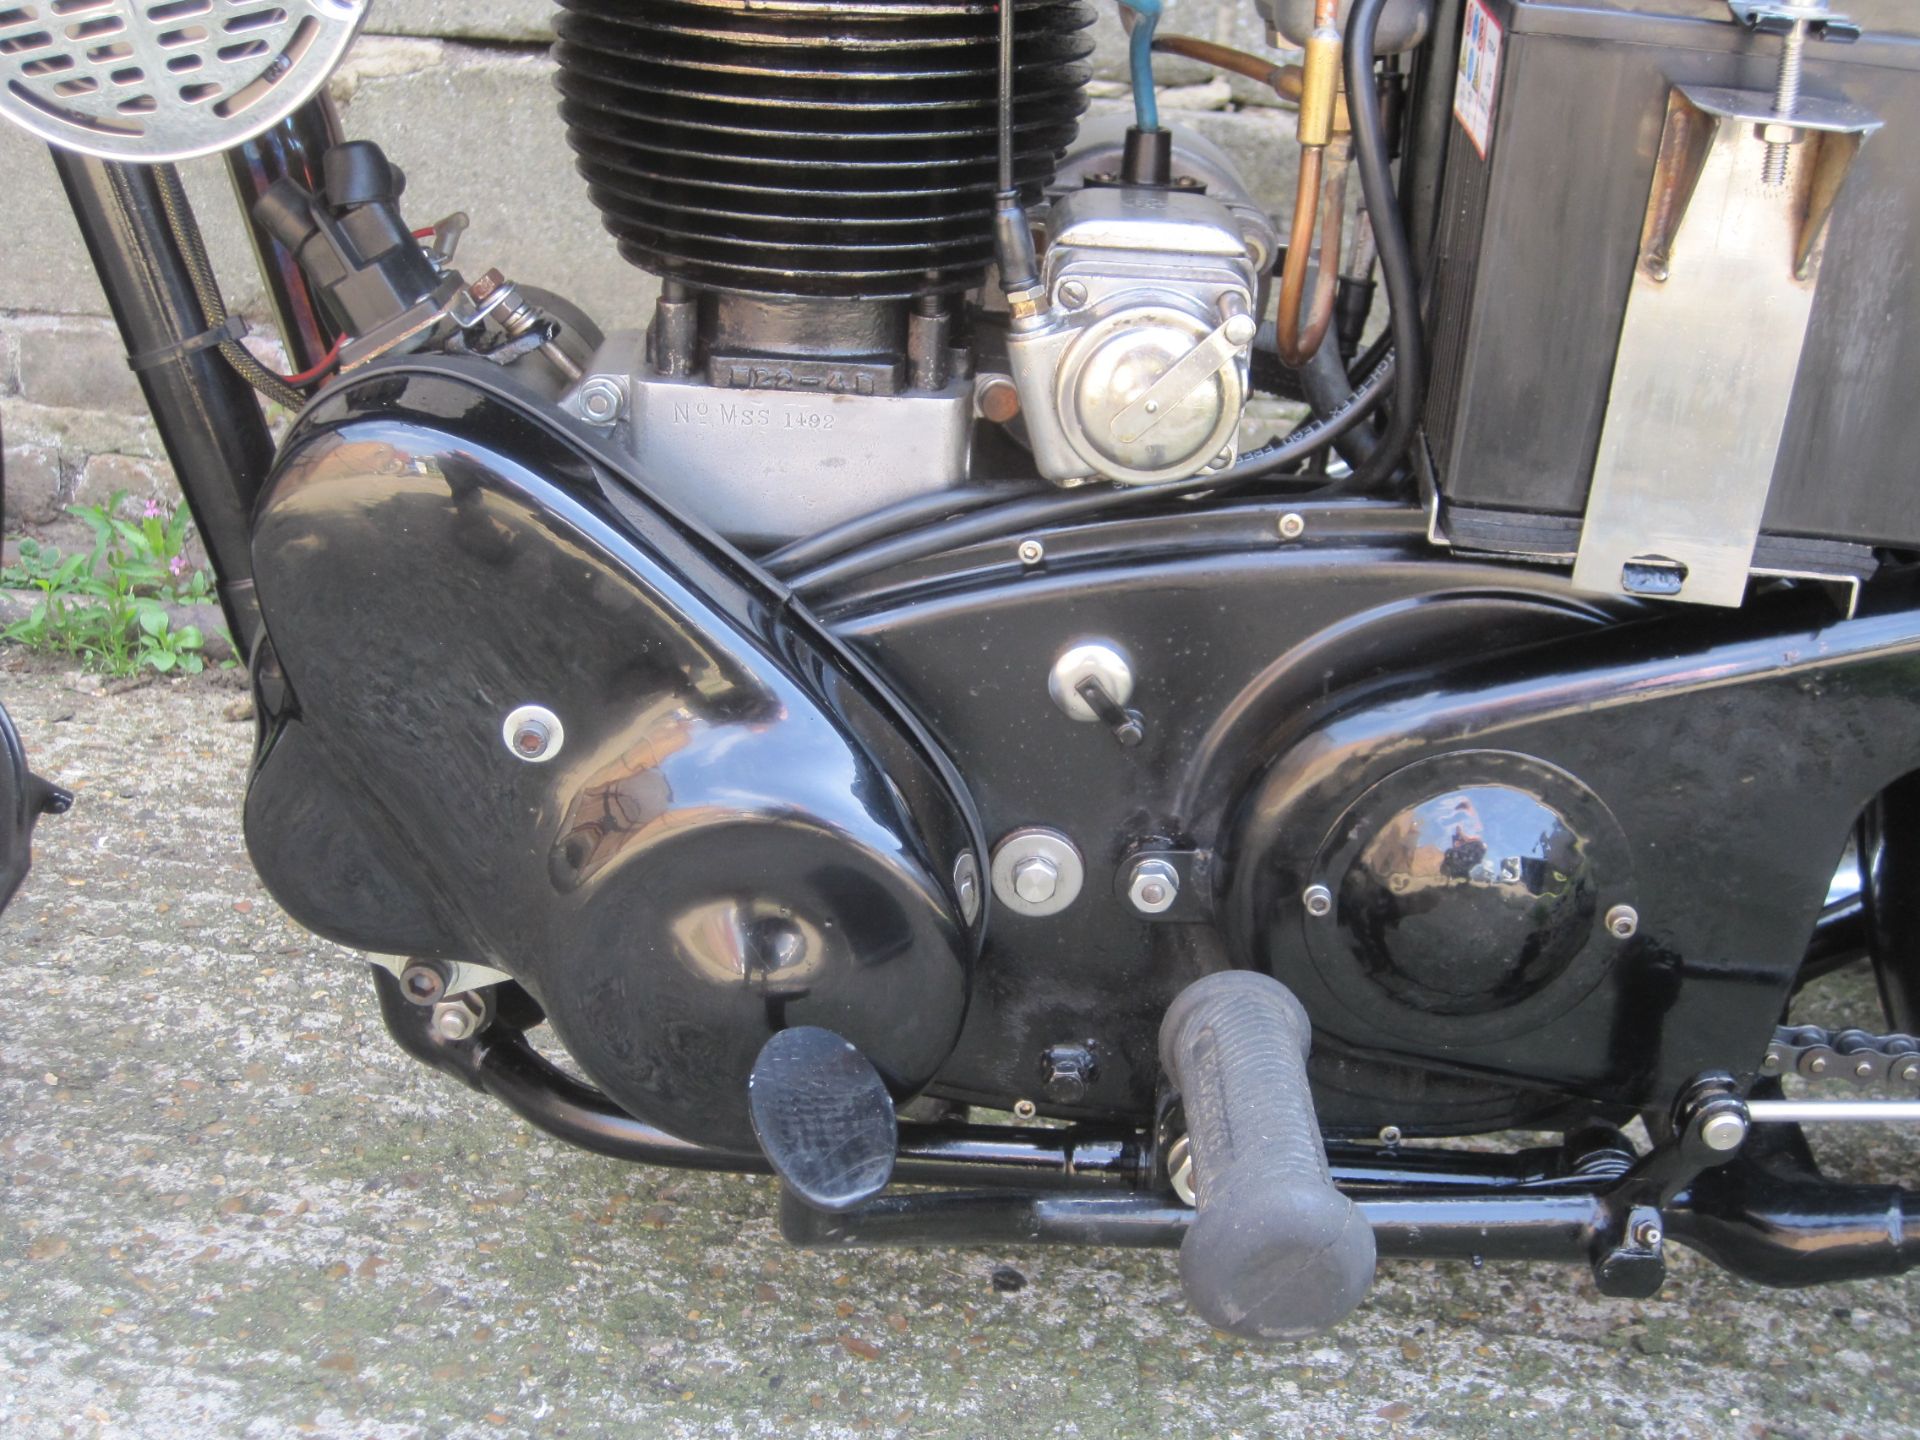 1936 500cc Velocette MSS Reg. No. WXG 502 Frame No. MS3547 Engine No. MSS 1492 Purchased some - Image 7 of 10